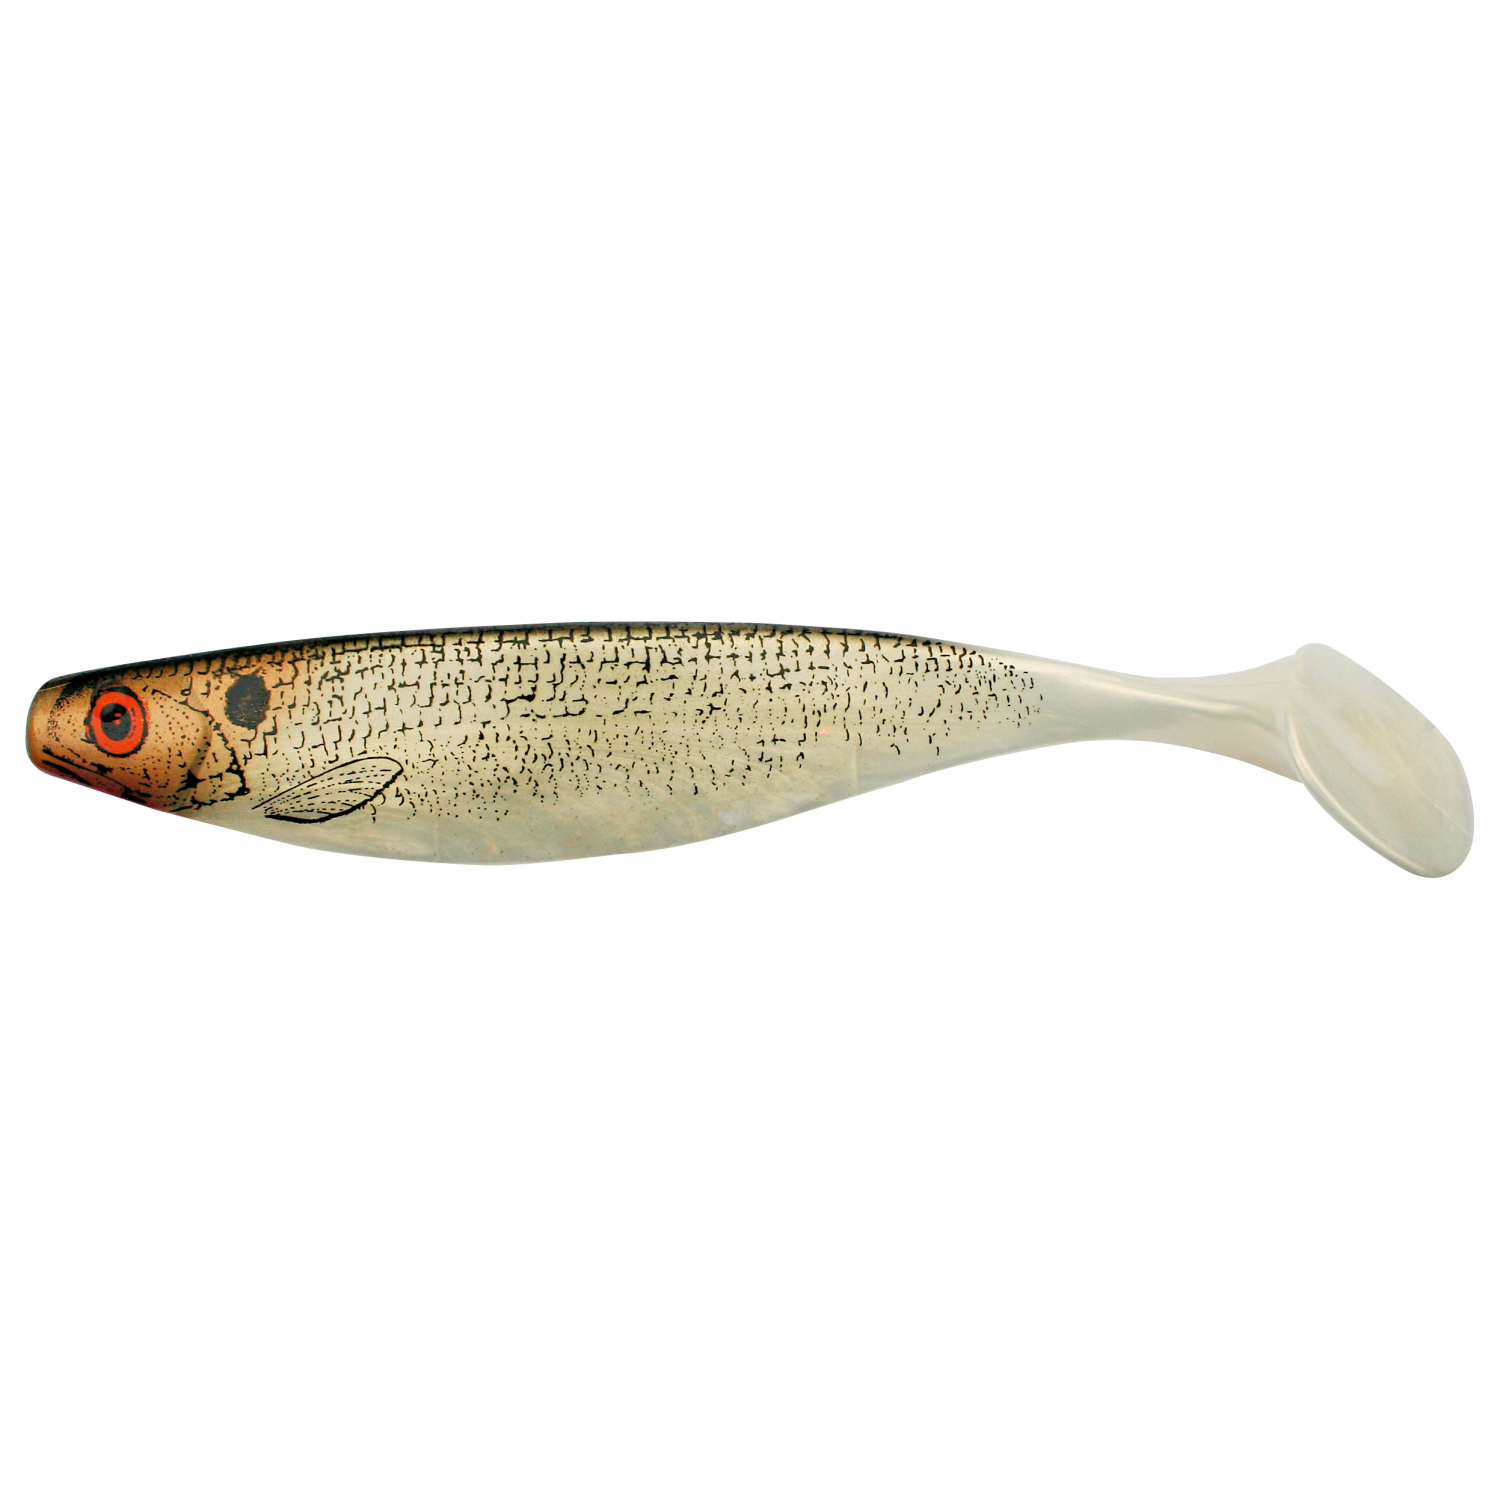 ShadXperts ShadXperts Shad Xtra-Soft-Nature 9 (Goldperl/Weißfisch) 